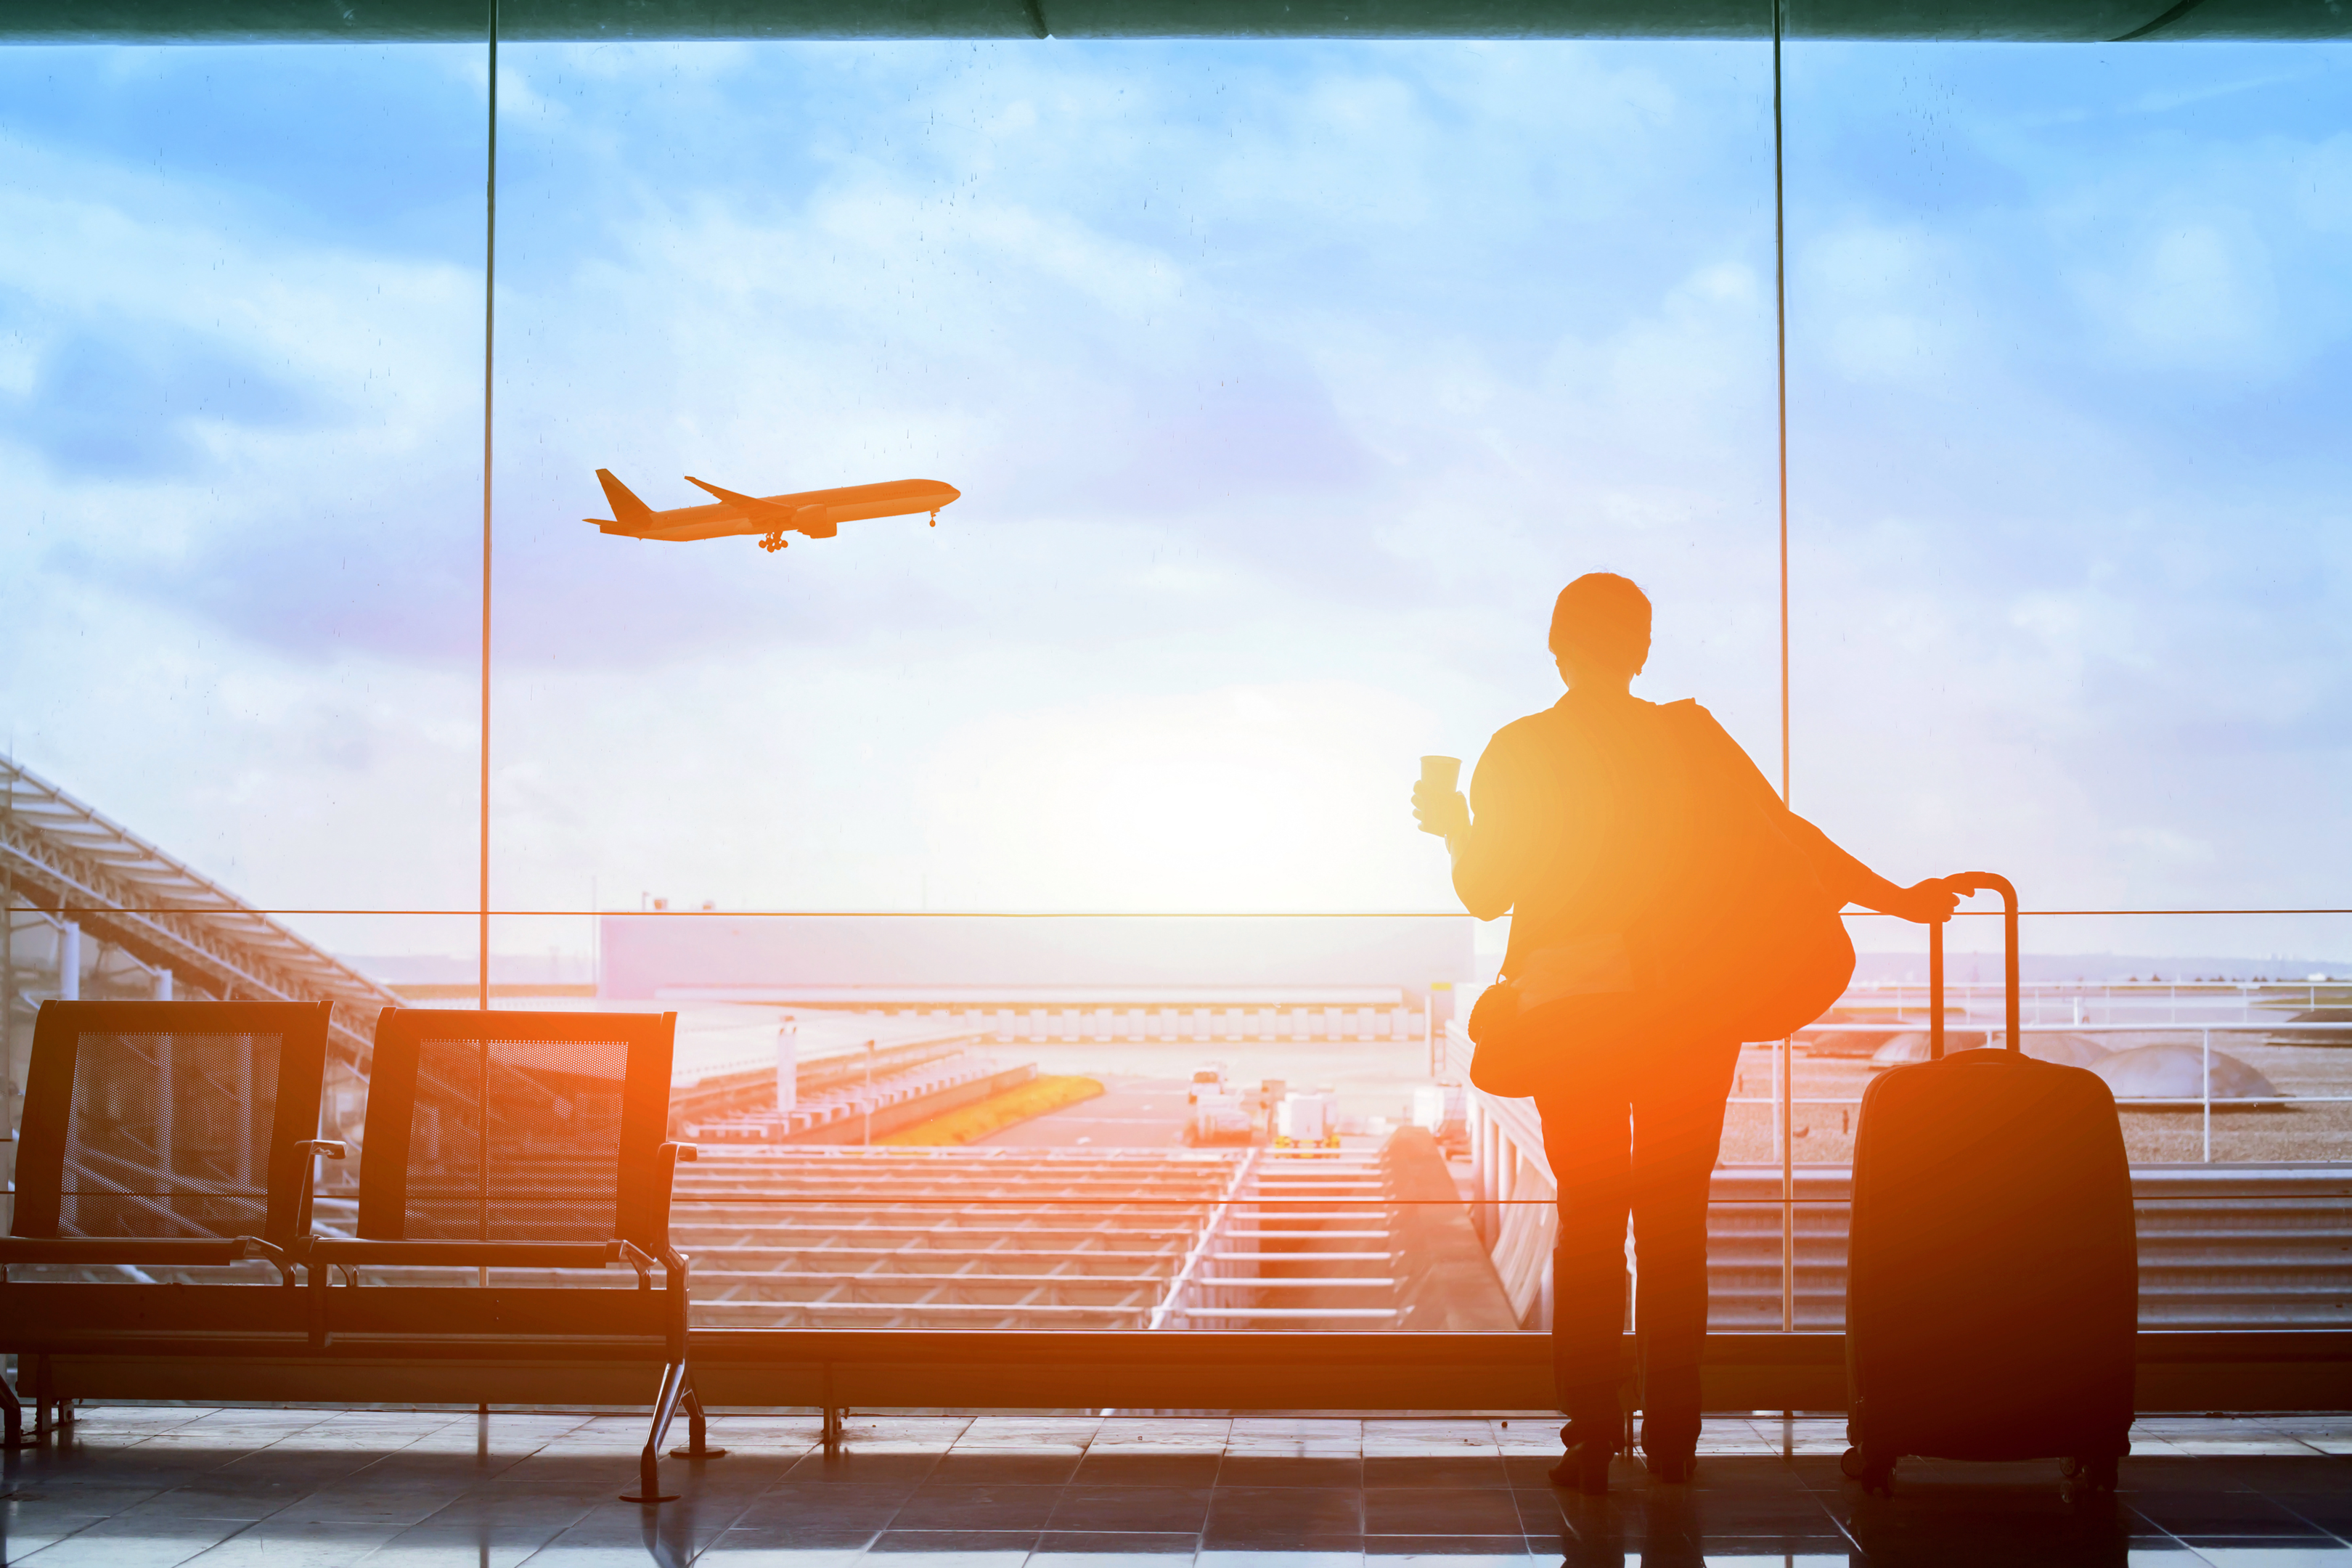 Business travelers taking corporate trips (or even personal travel) should utilize their virtual assistant to find the best deals.